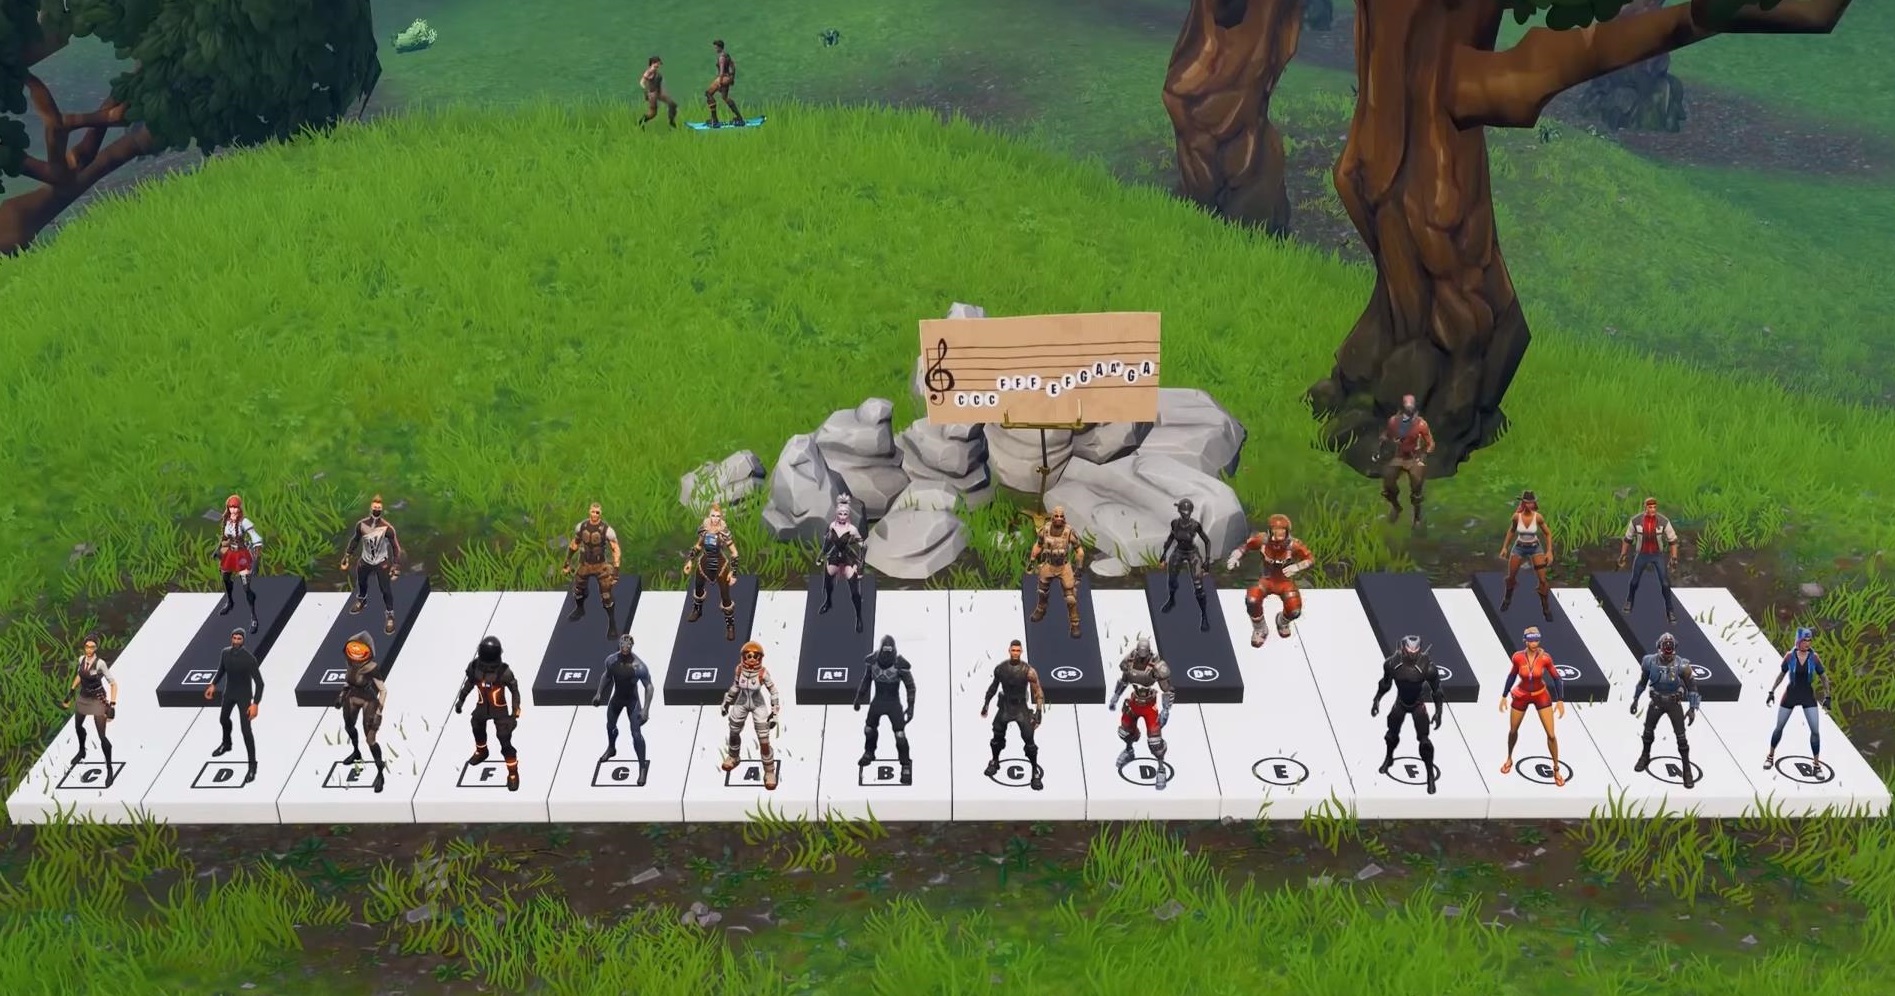 Fortnite: watch 24 players play Marshmello’s Alone on the game’s giant piano